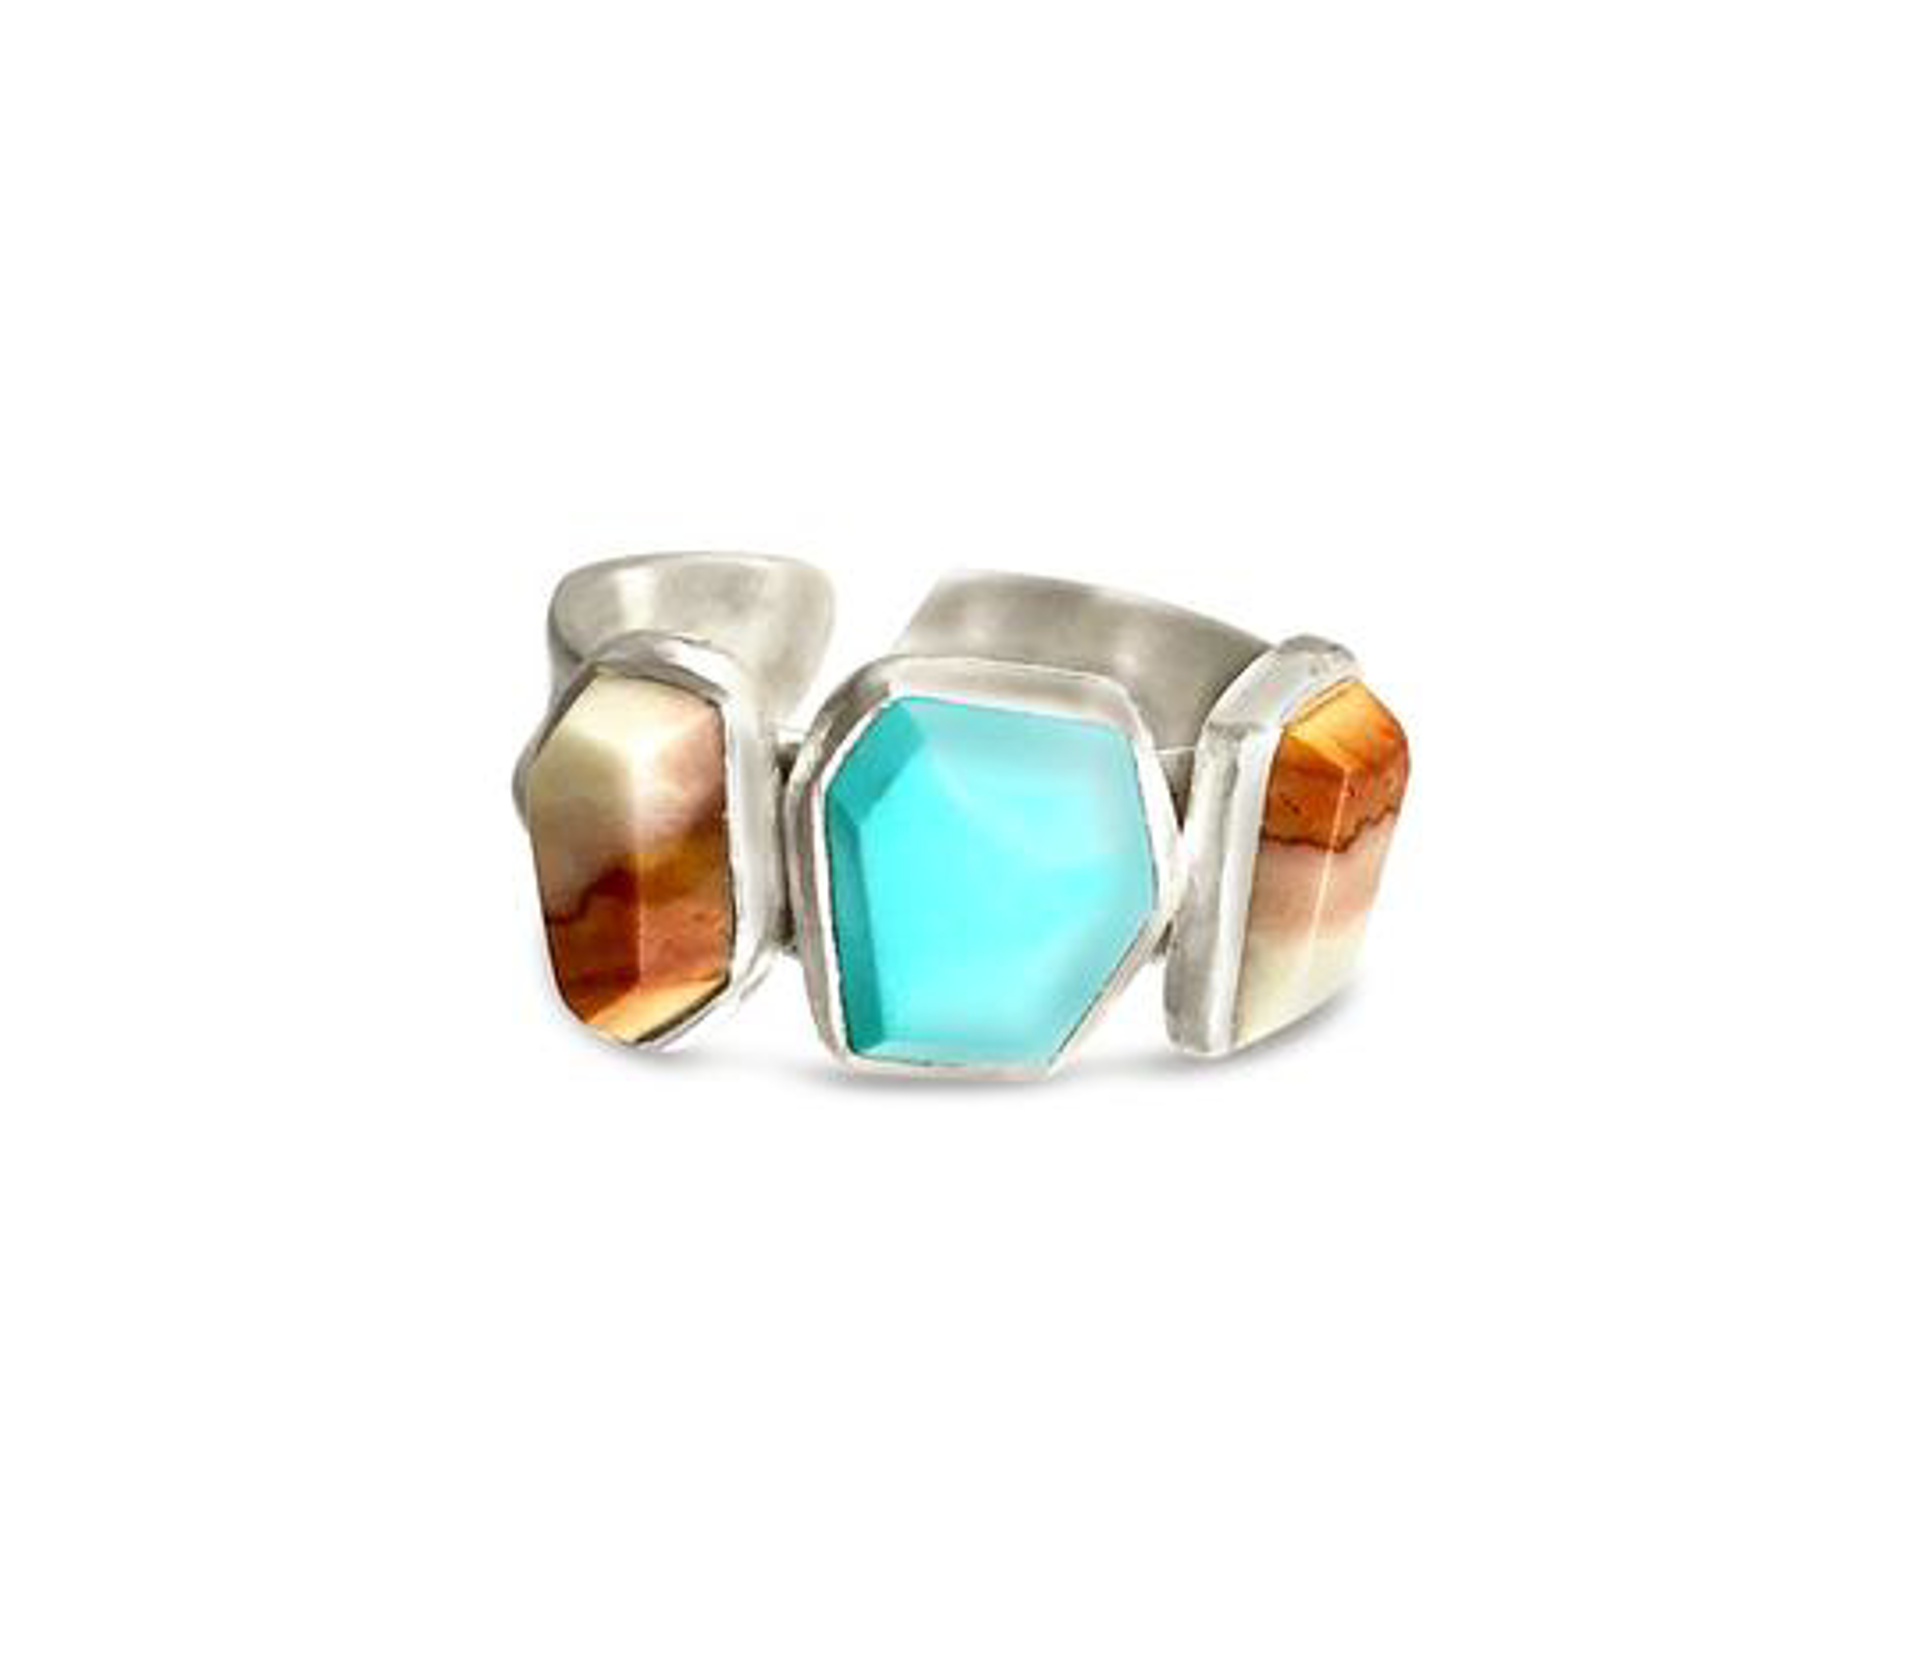 Ring - Nevada Turquoise & Jasper in Sterling Silver - Adjustable by Pattie Parkhurst